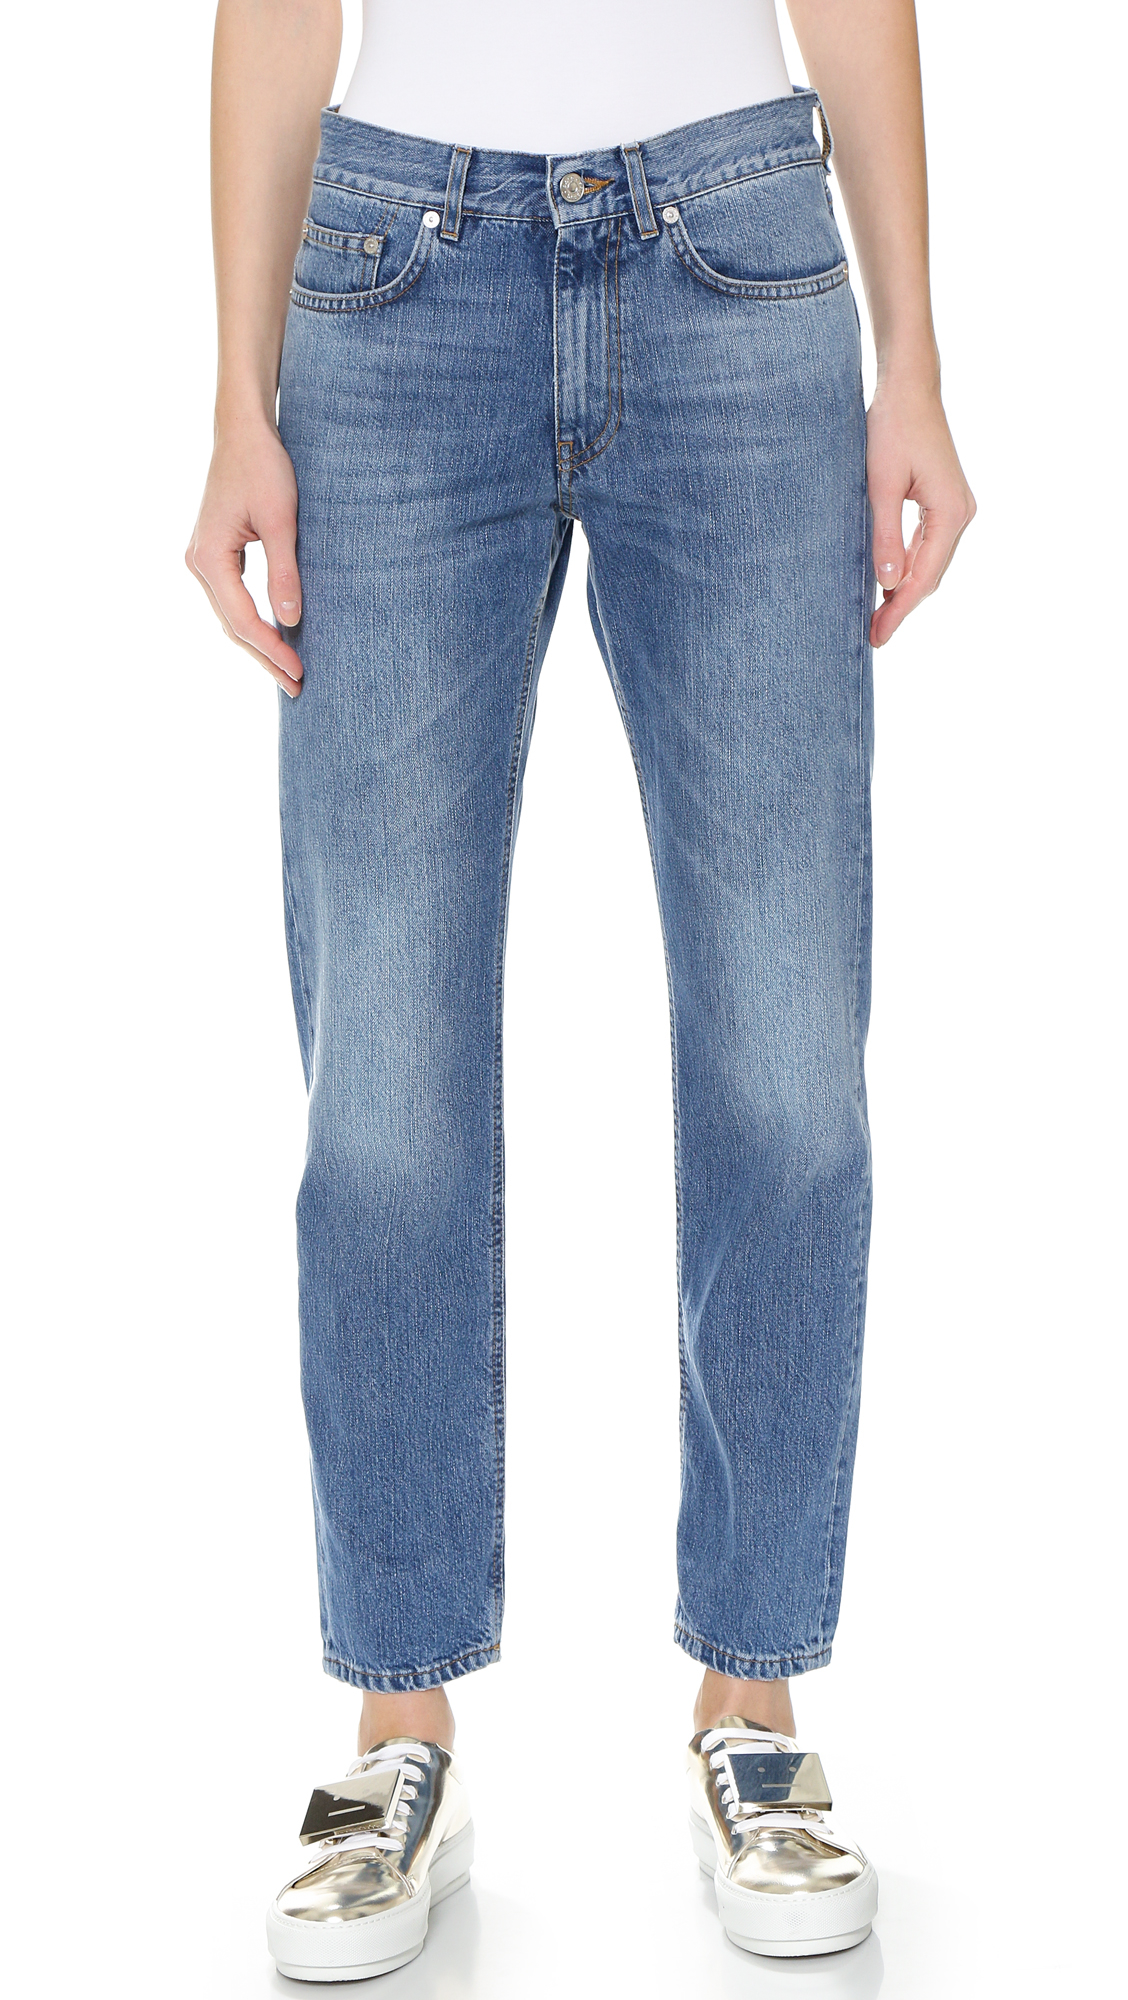 Acne Studios The Boy Jeans - Vintage in Blue - Lyst